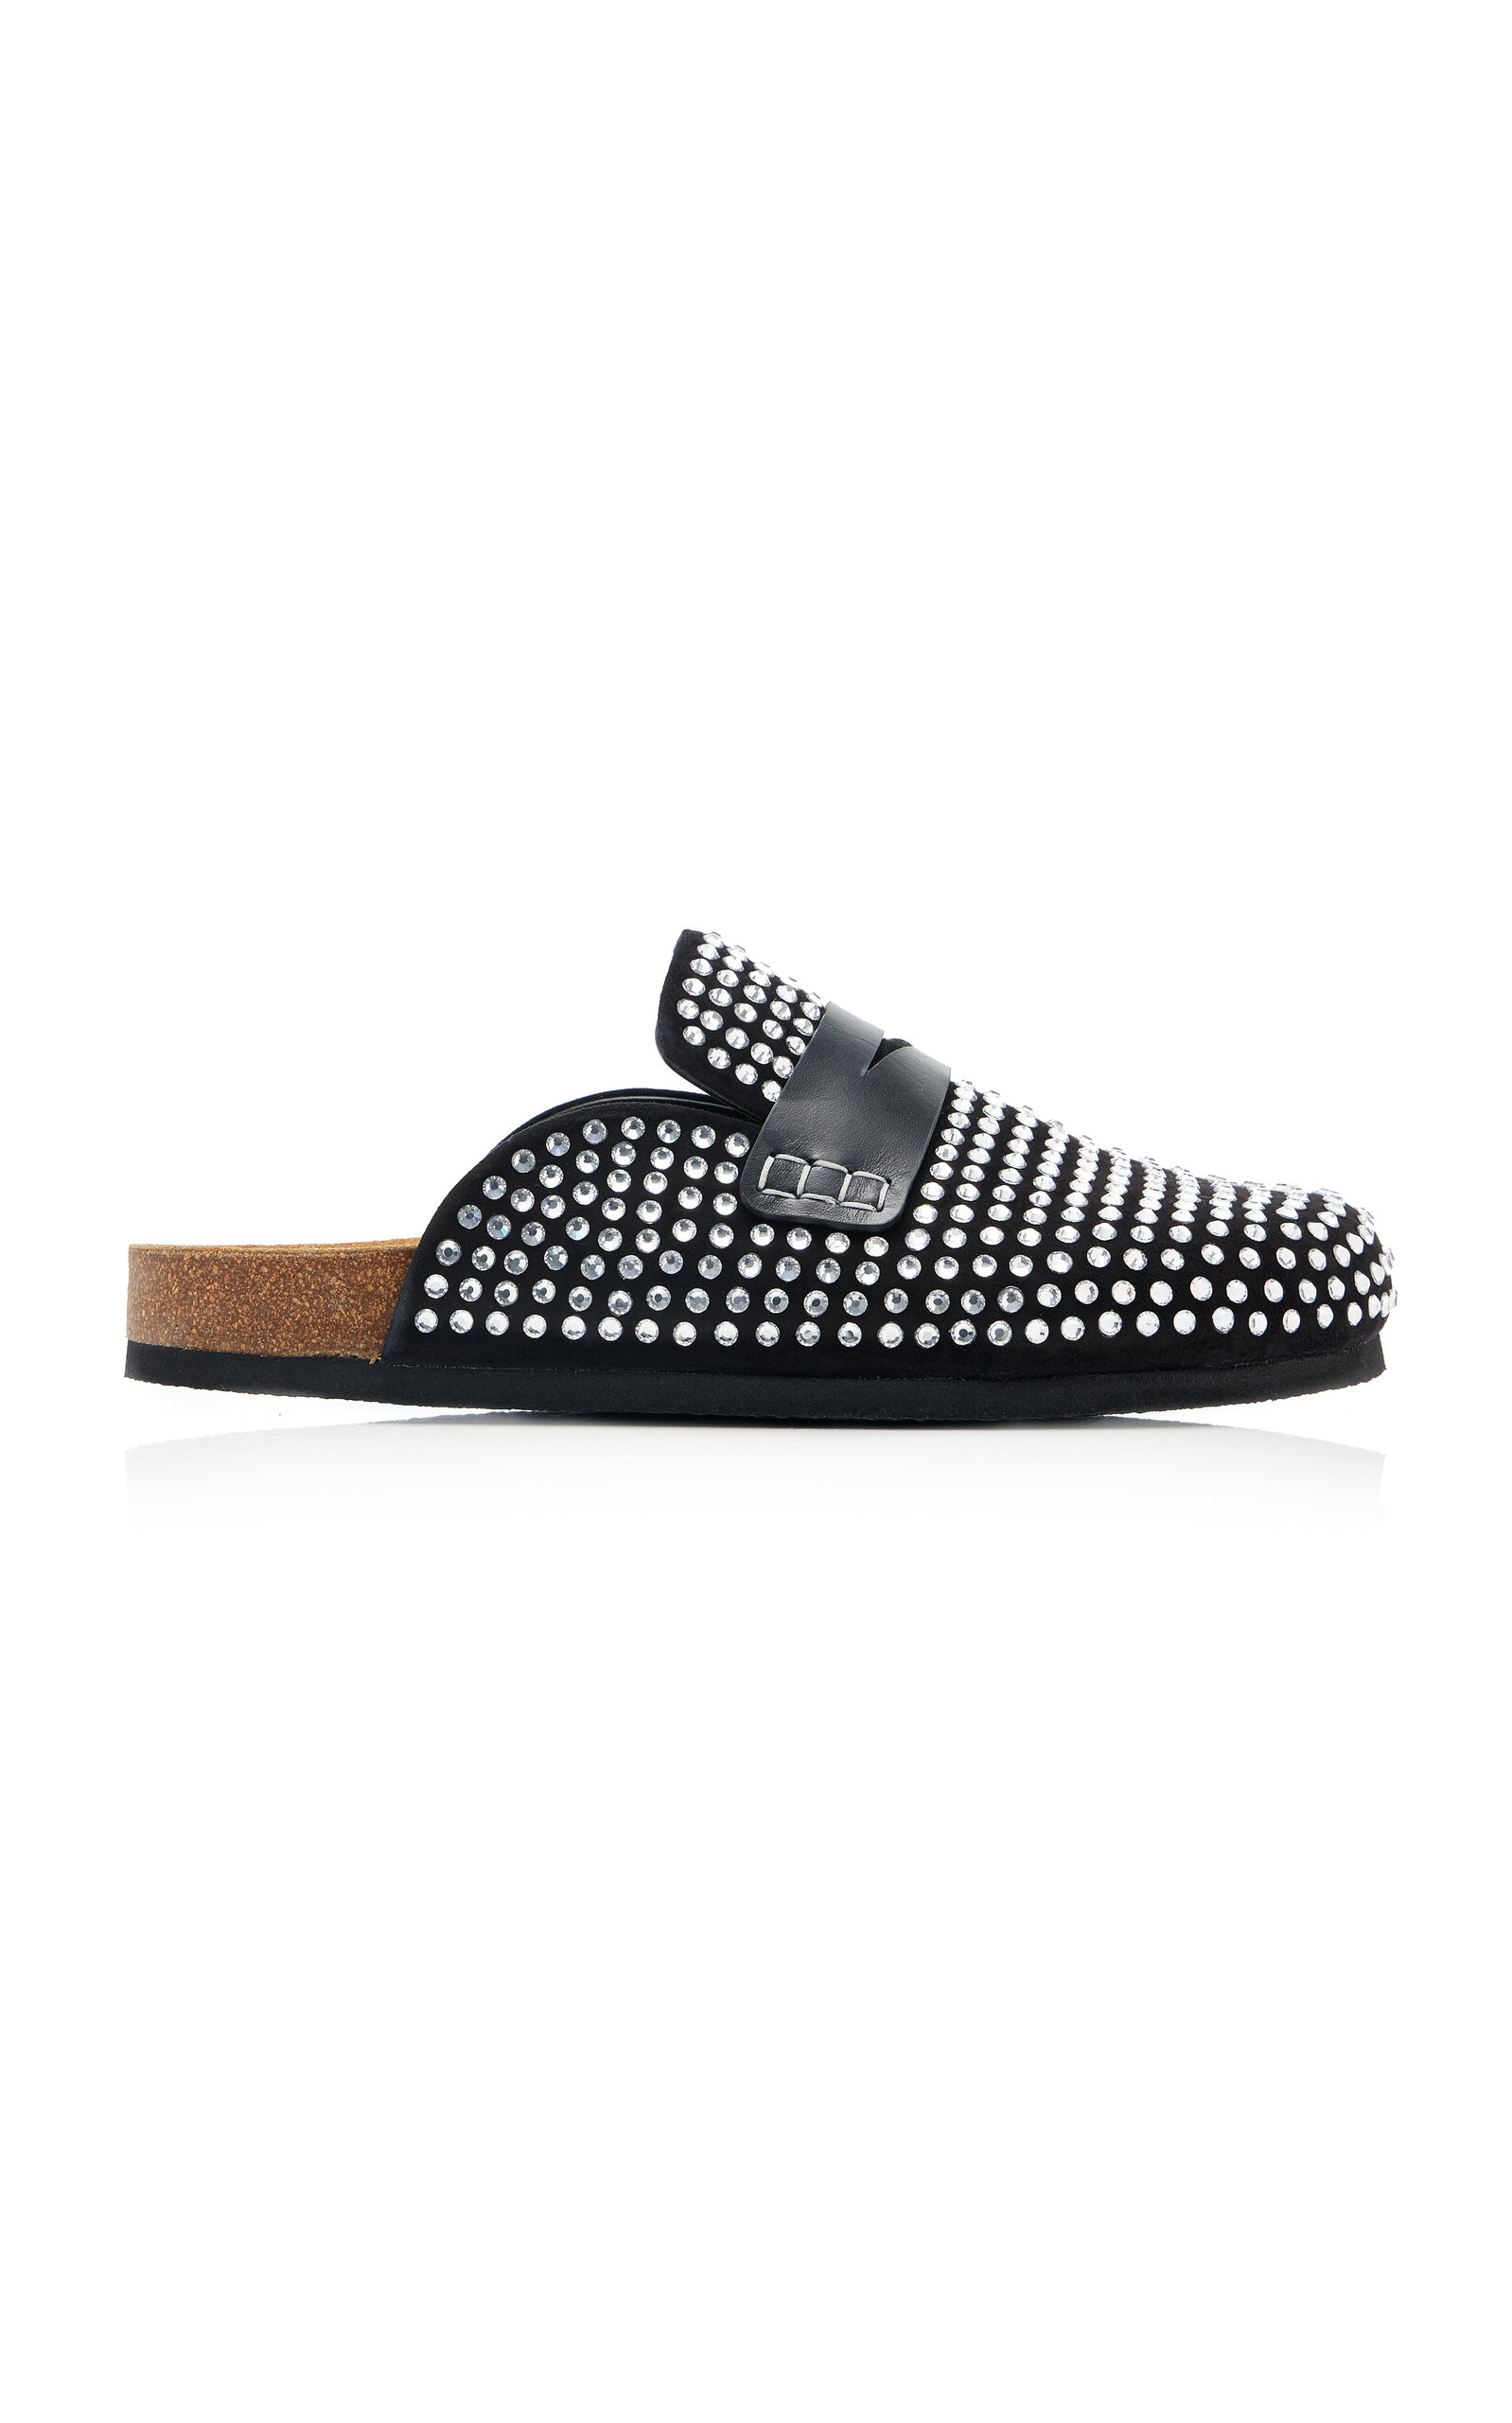 JW ANDERSON WOMEN'S STRASS CRYSTAL-STUDDED SUEDE LOAFER 